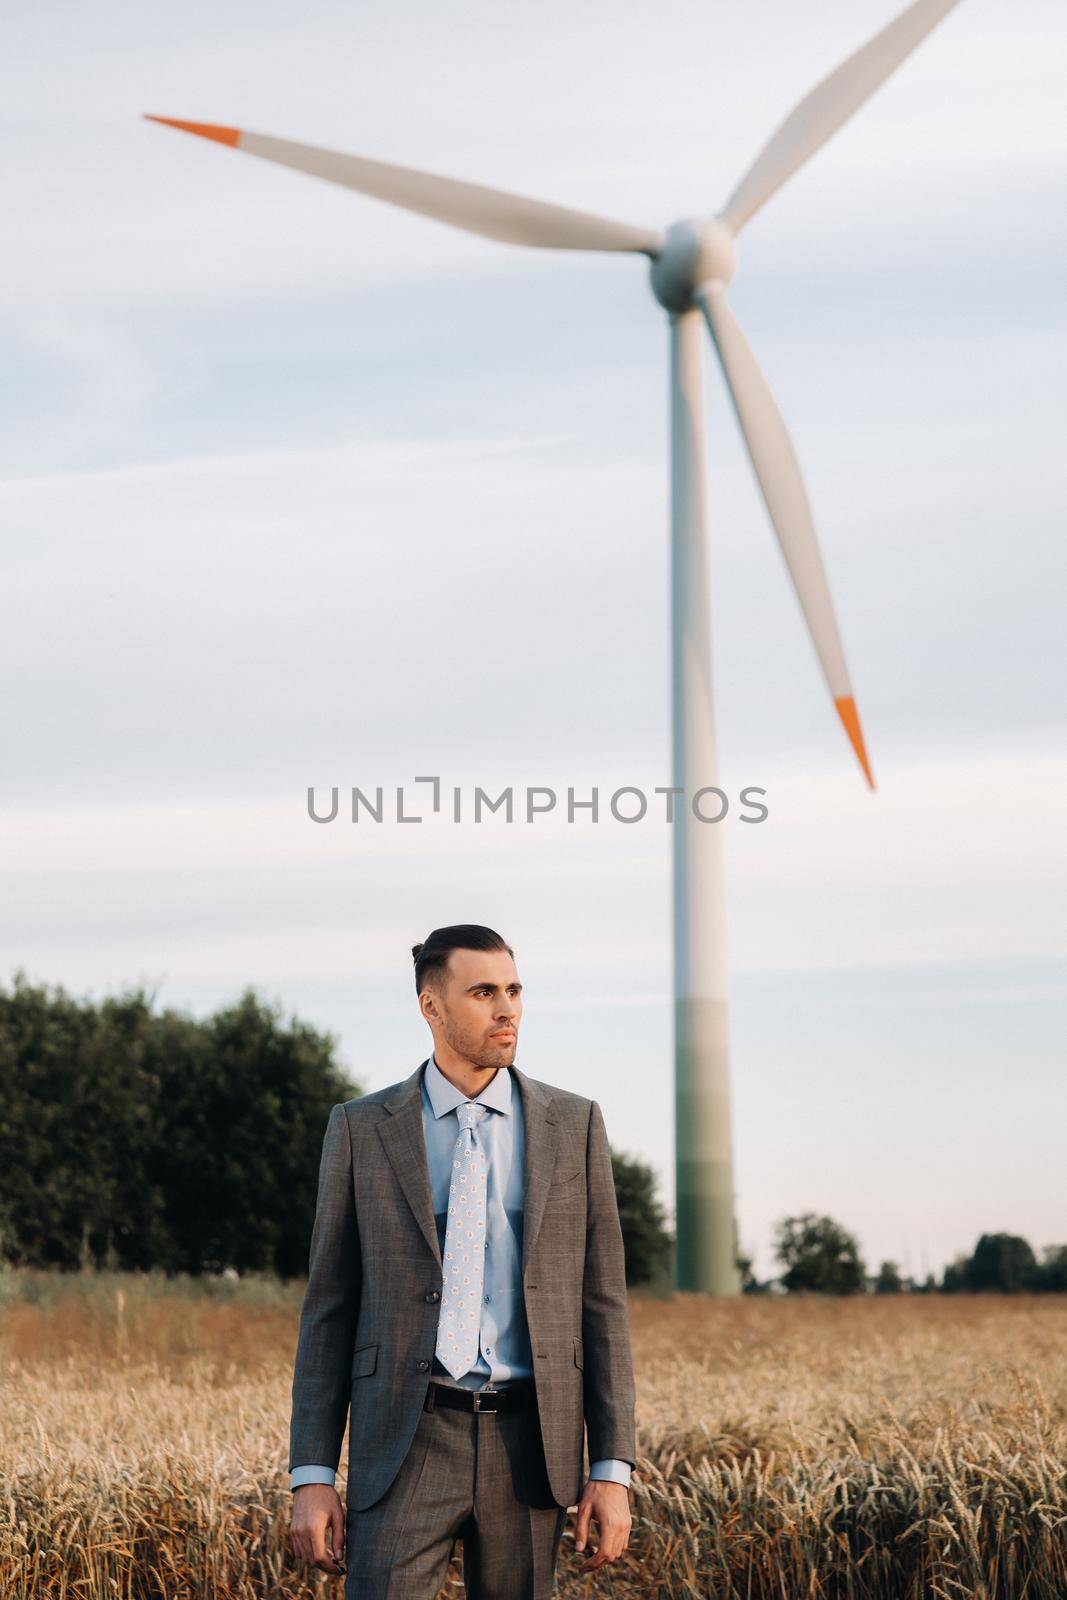 Portrait of a businessman in a gray suit on a wheat field against the background of a windmill and the evening sky.